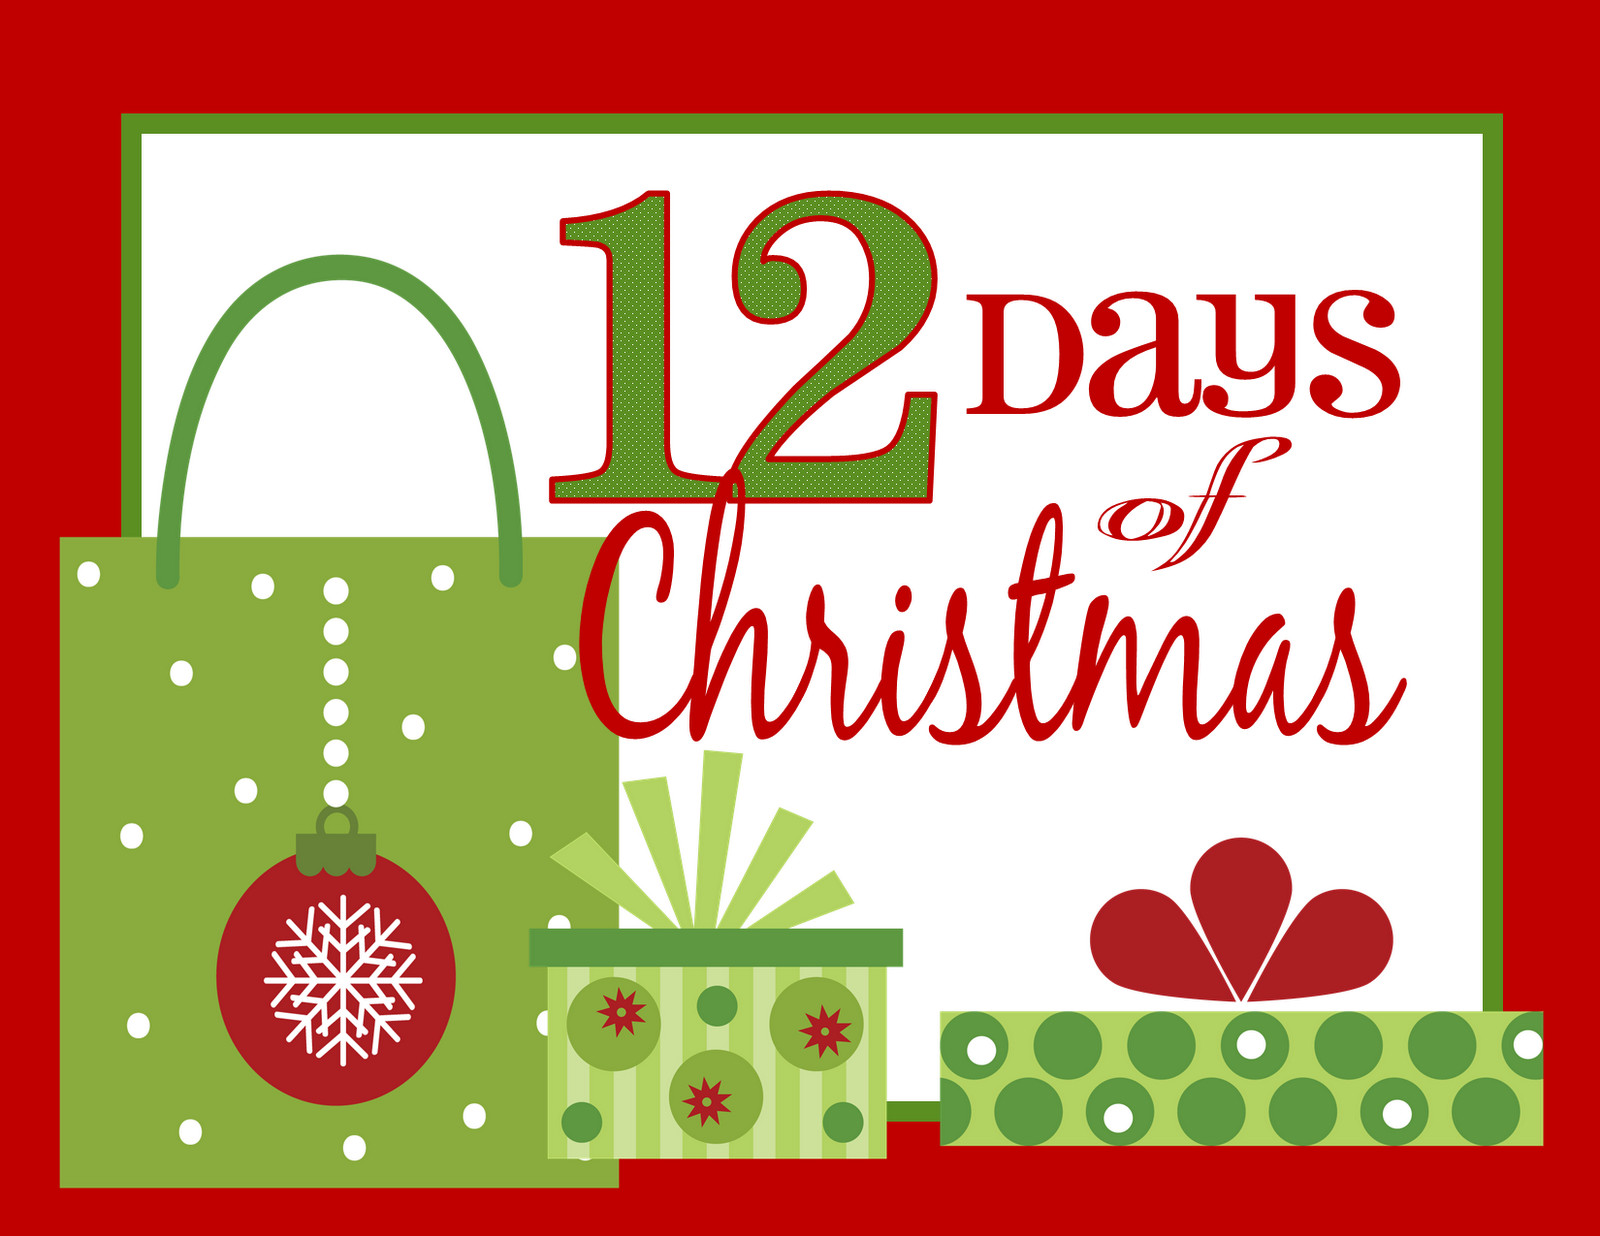 12 Days Of Christmas Gifts
 Peter s Place The Cost Index for the Twelve Days of